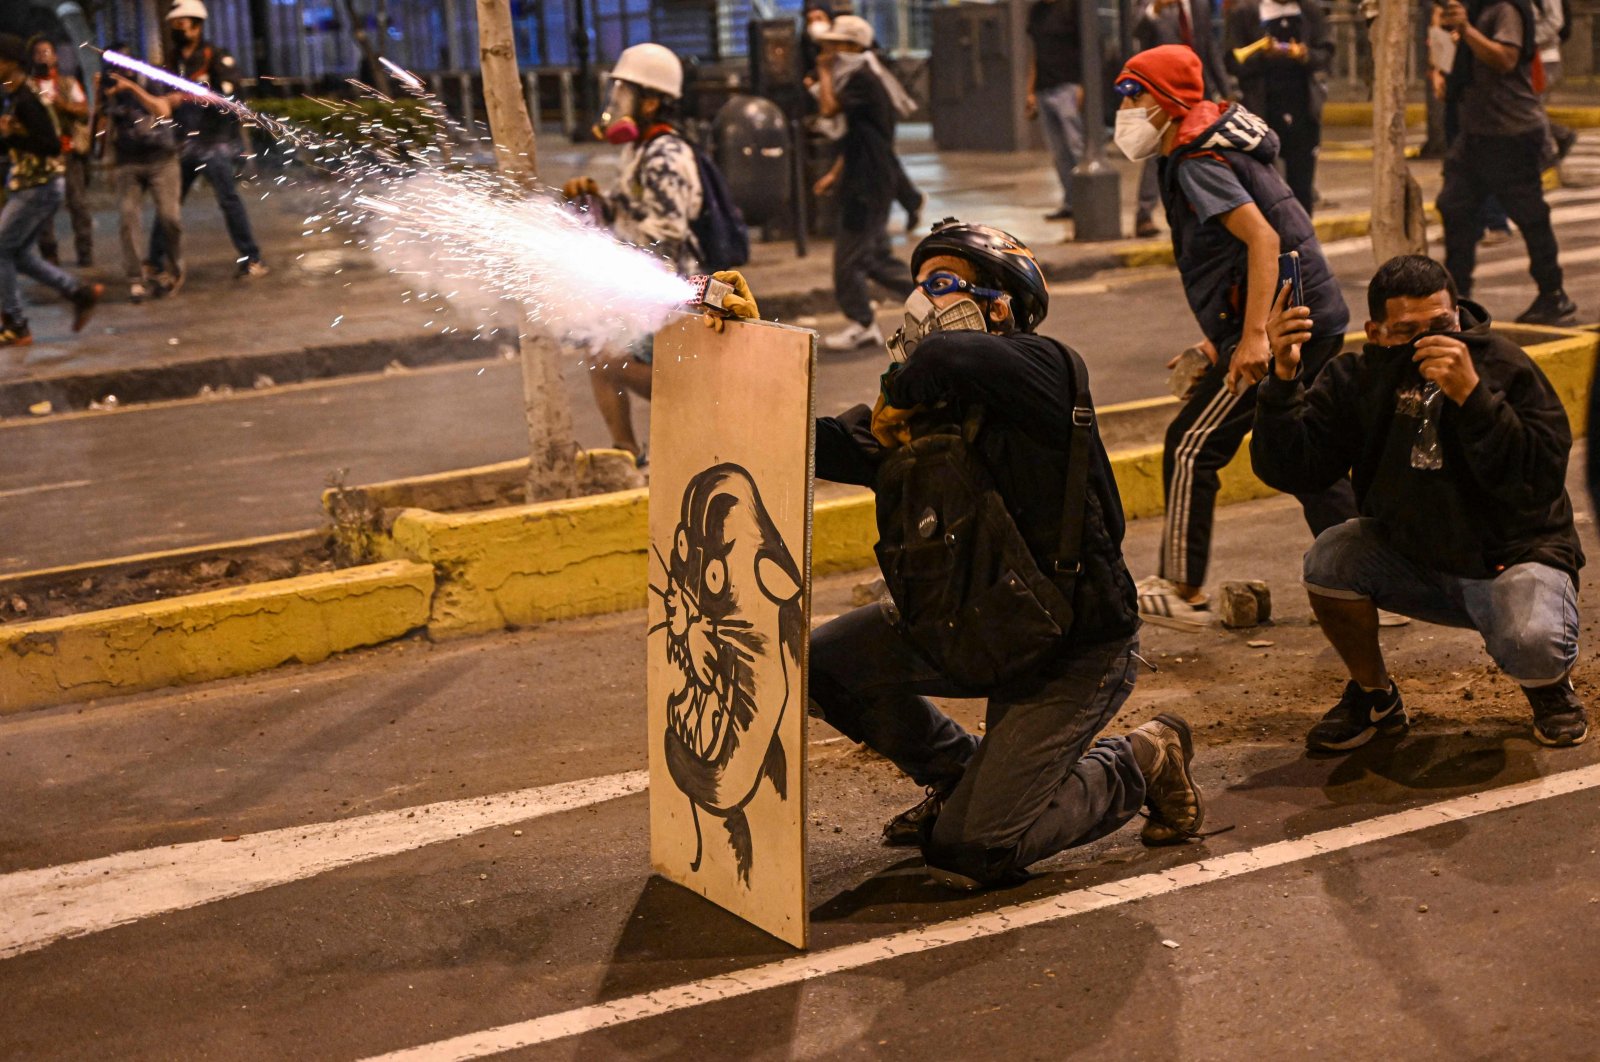 Supporters of former President Pedro Castillo launch firecrackers at riot police during a protest in Lima, Peru, Dec. 12, 2022. (AFP Photo)